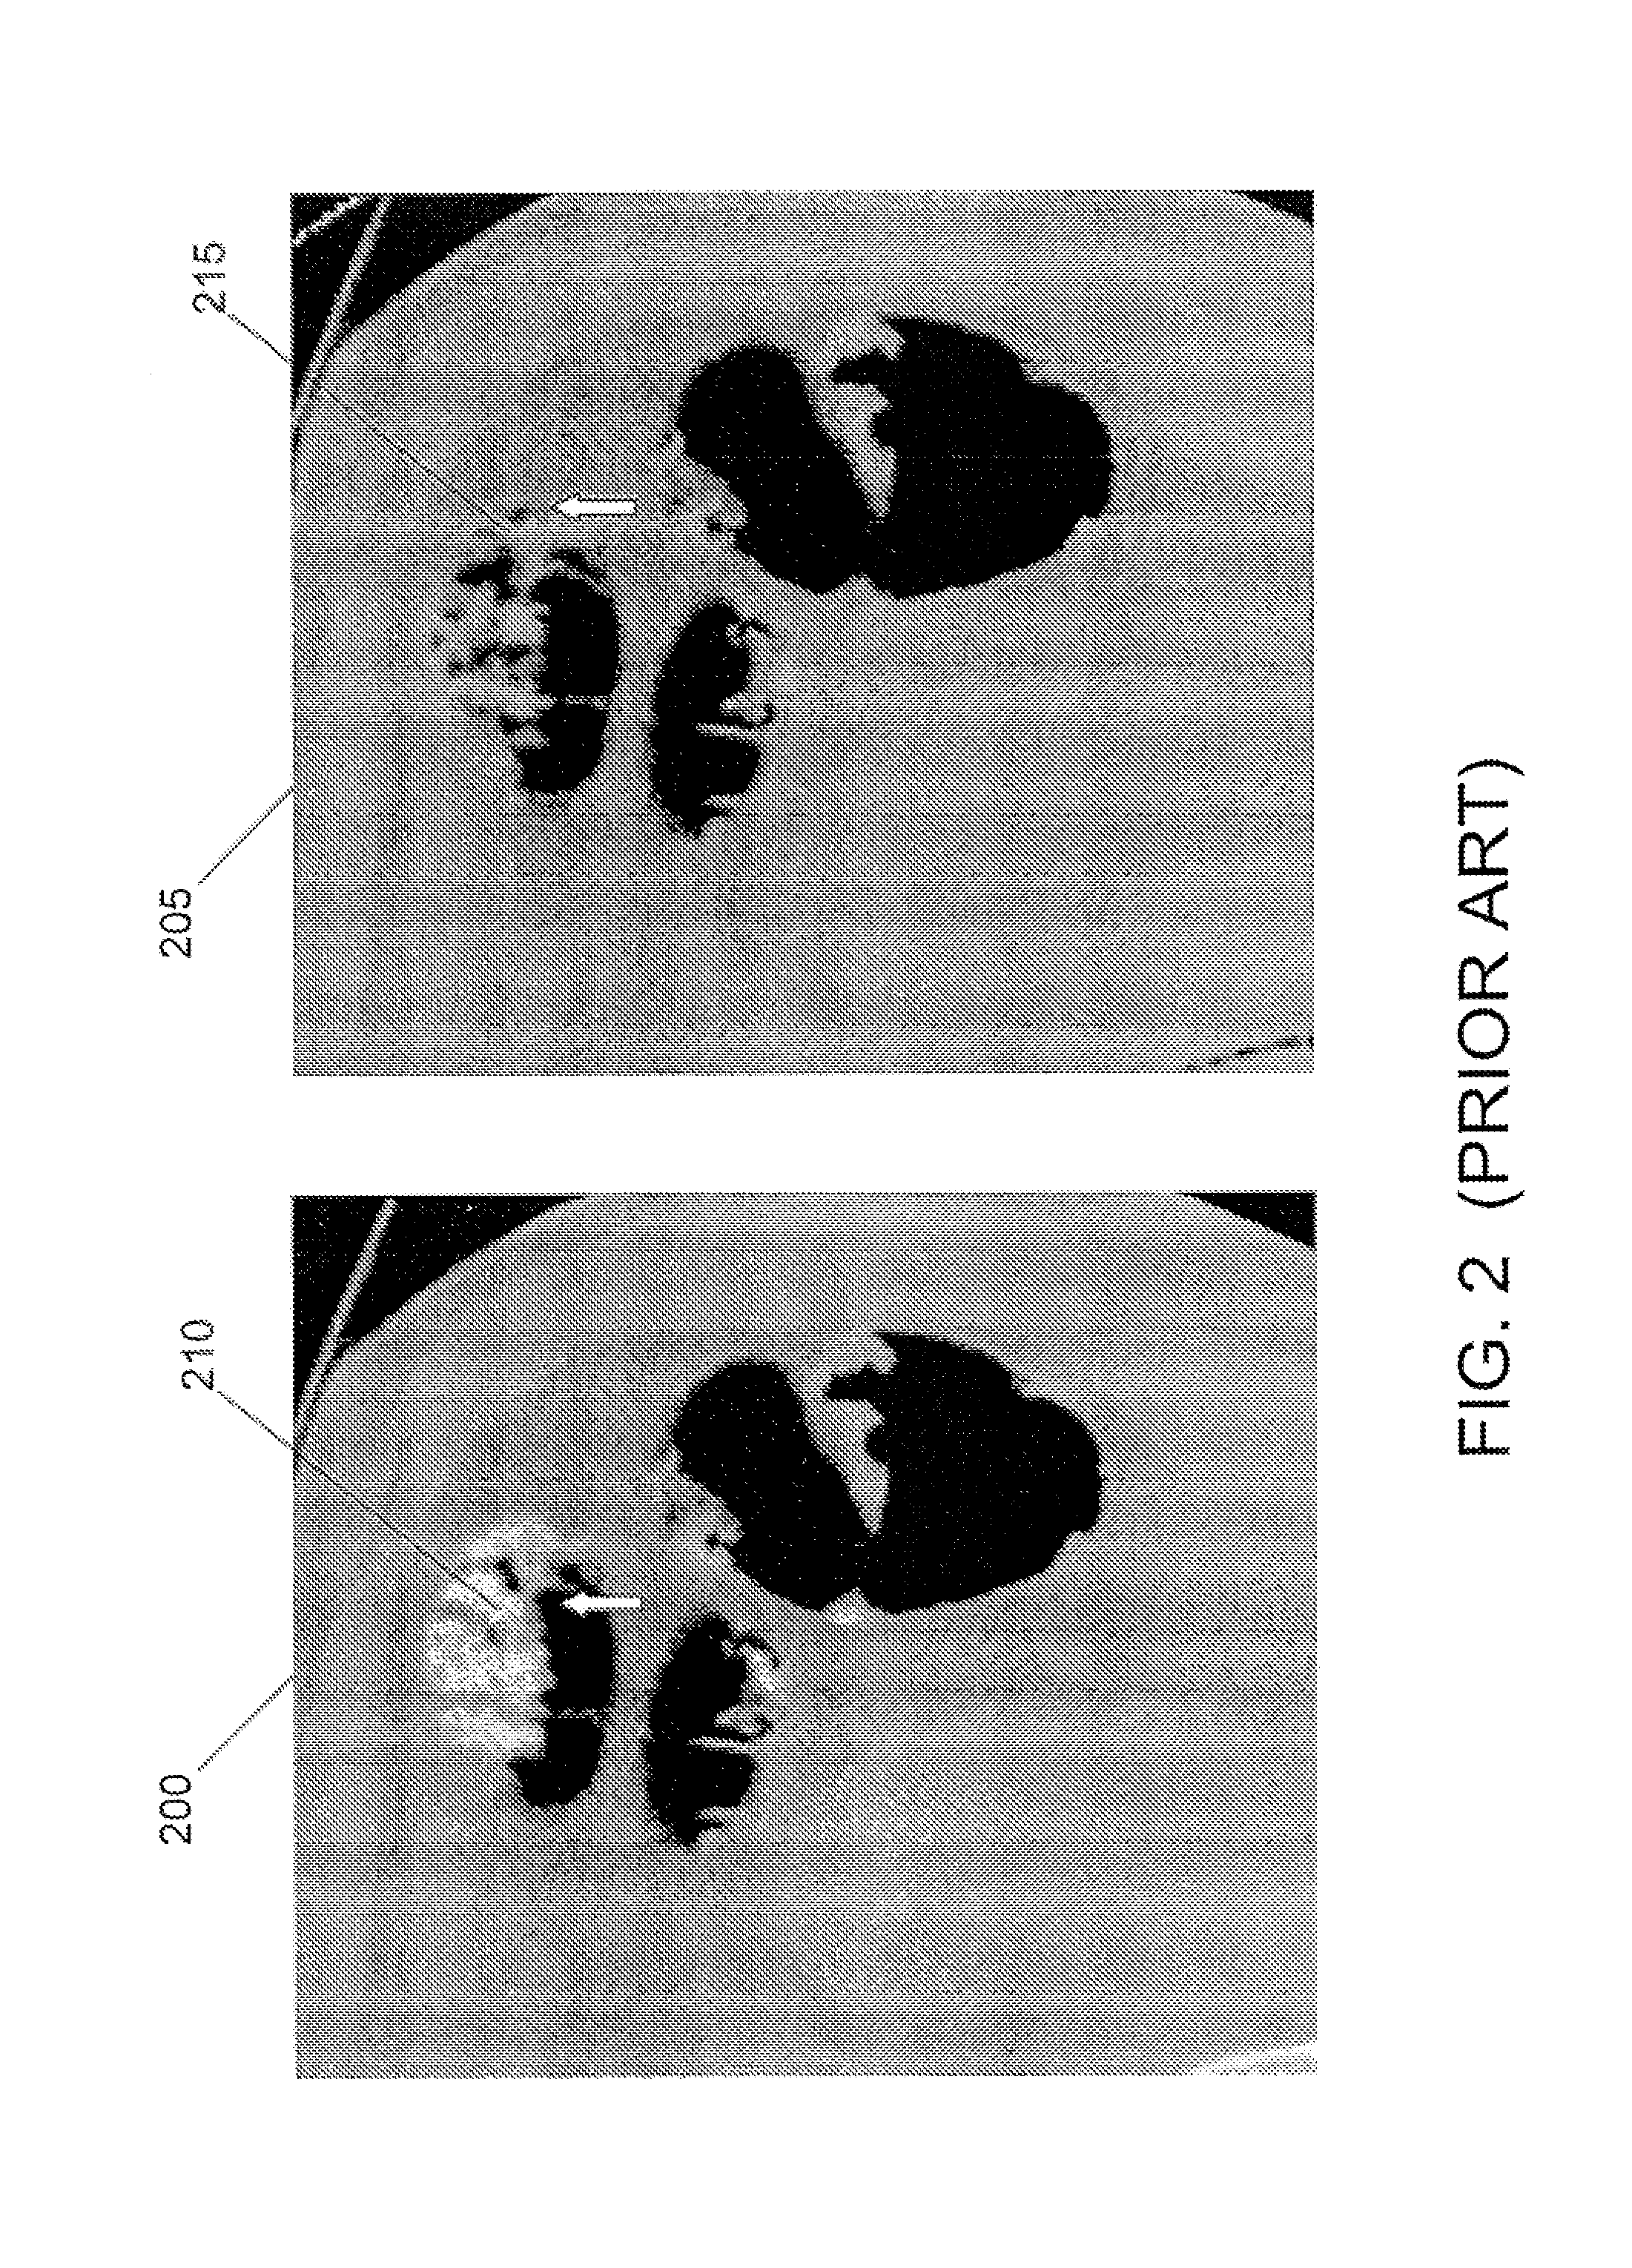 Structure-analysis system, method, software arrangement and computer-accessible medium for digital cleansing of computed tomography colonography images